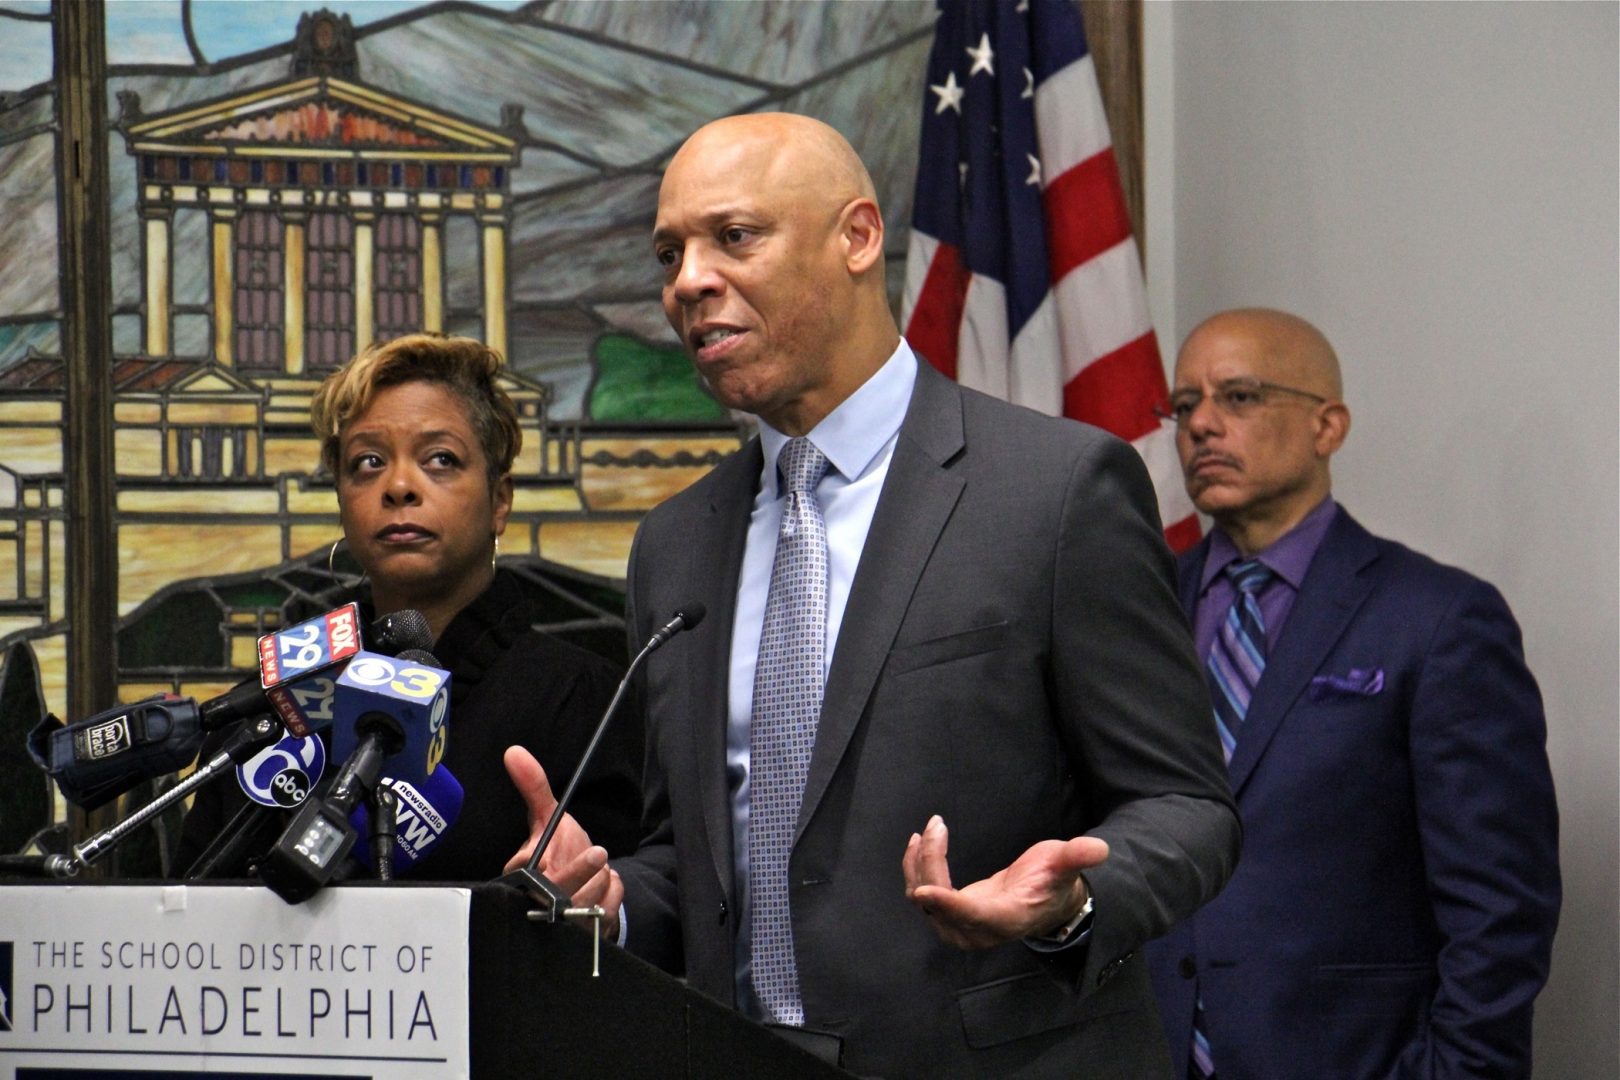 Philadelphia schools Superintendent William Hite announces the districts plan to improve environmental safety at its schools. He is joined by state Rep. Vincent Hughes (right), Councilmember Cindy Bass (left), and other local officials.